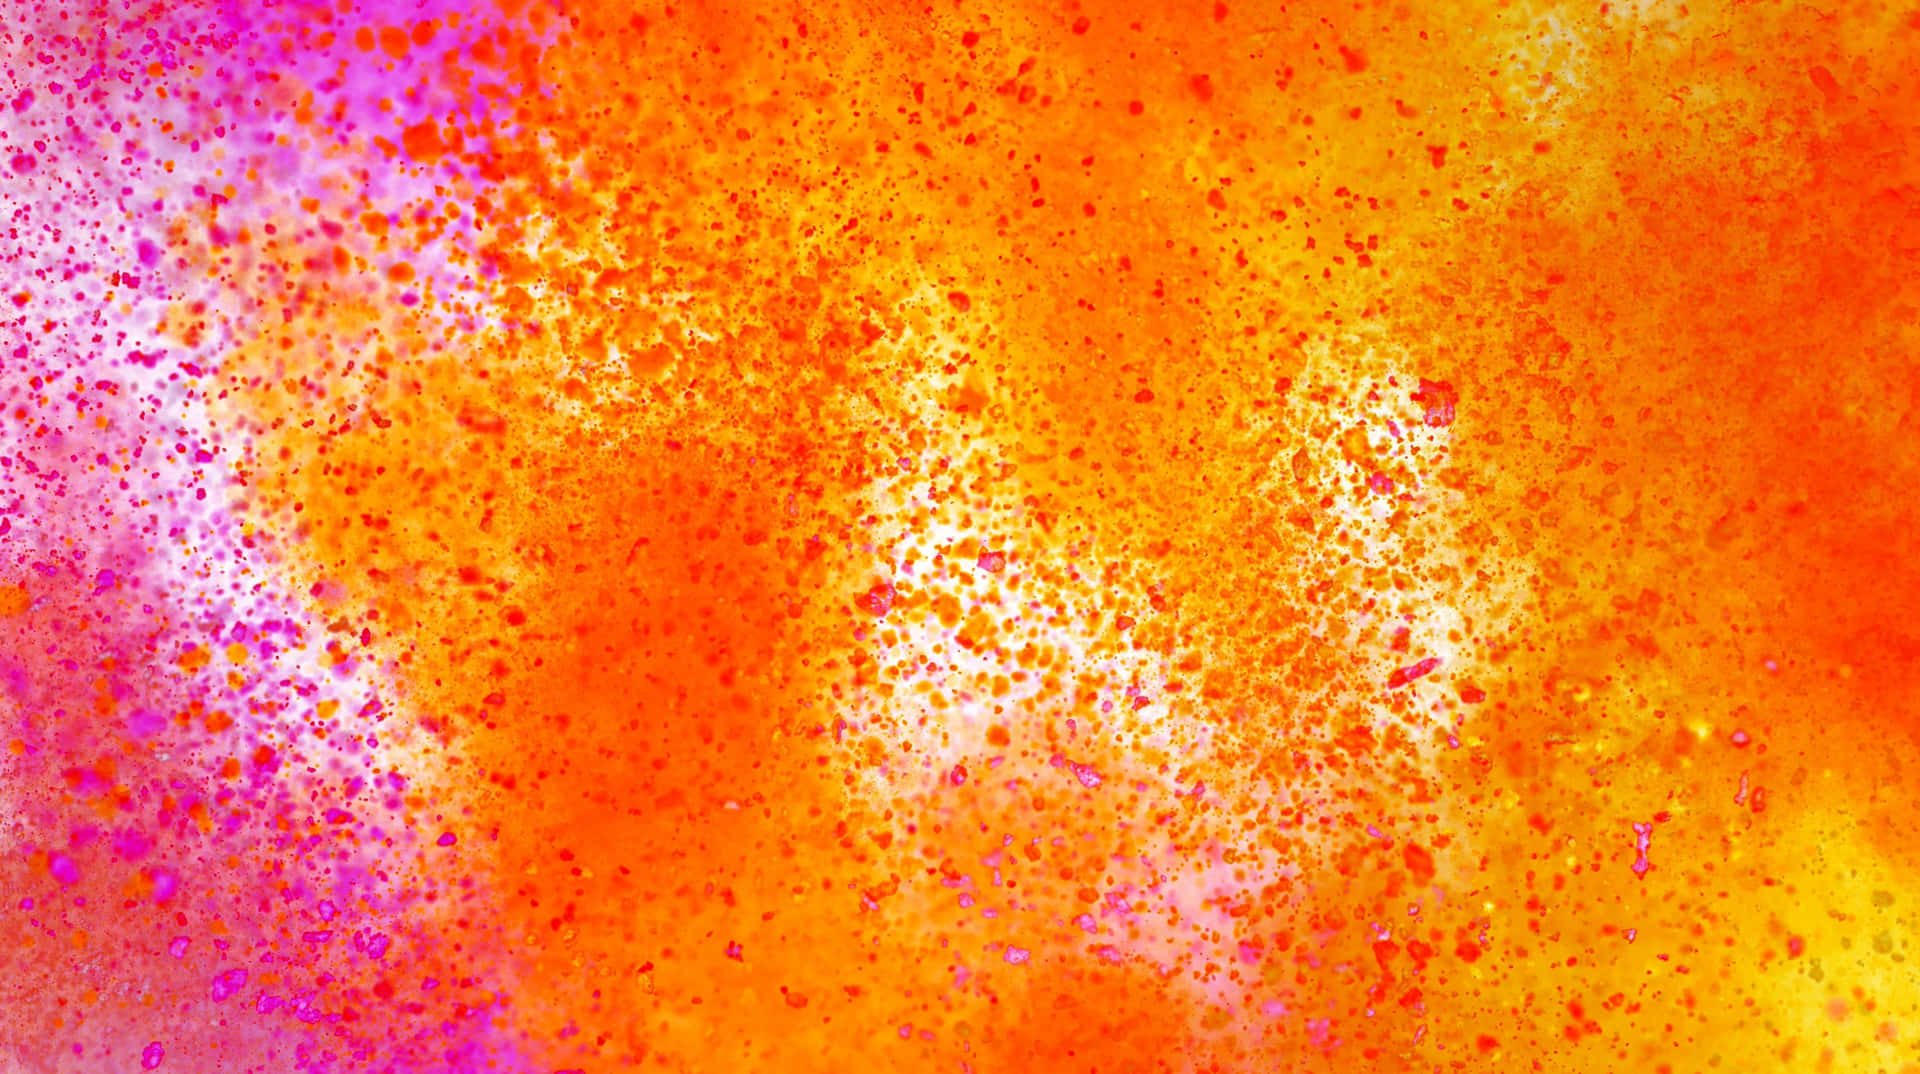 Vibrant Pink Orange Abstract Background Wallpaper